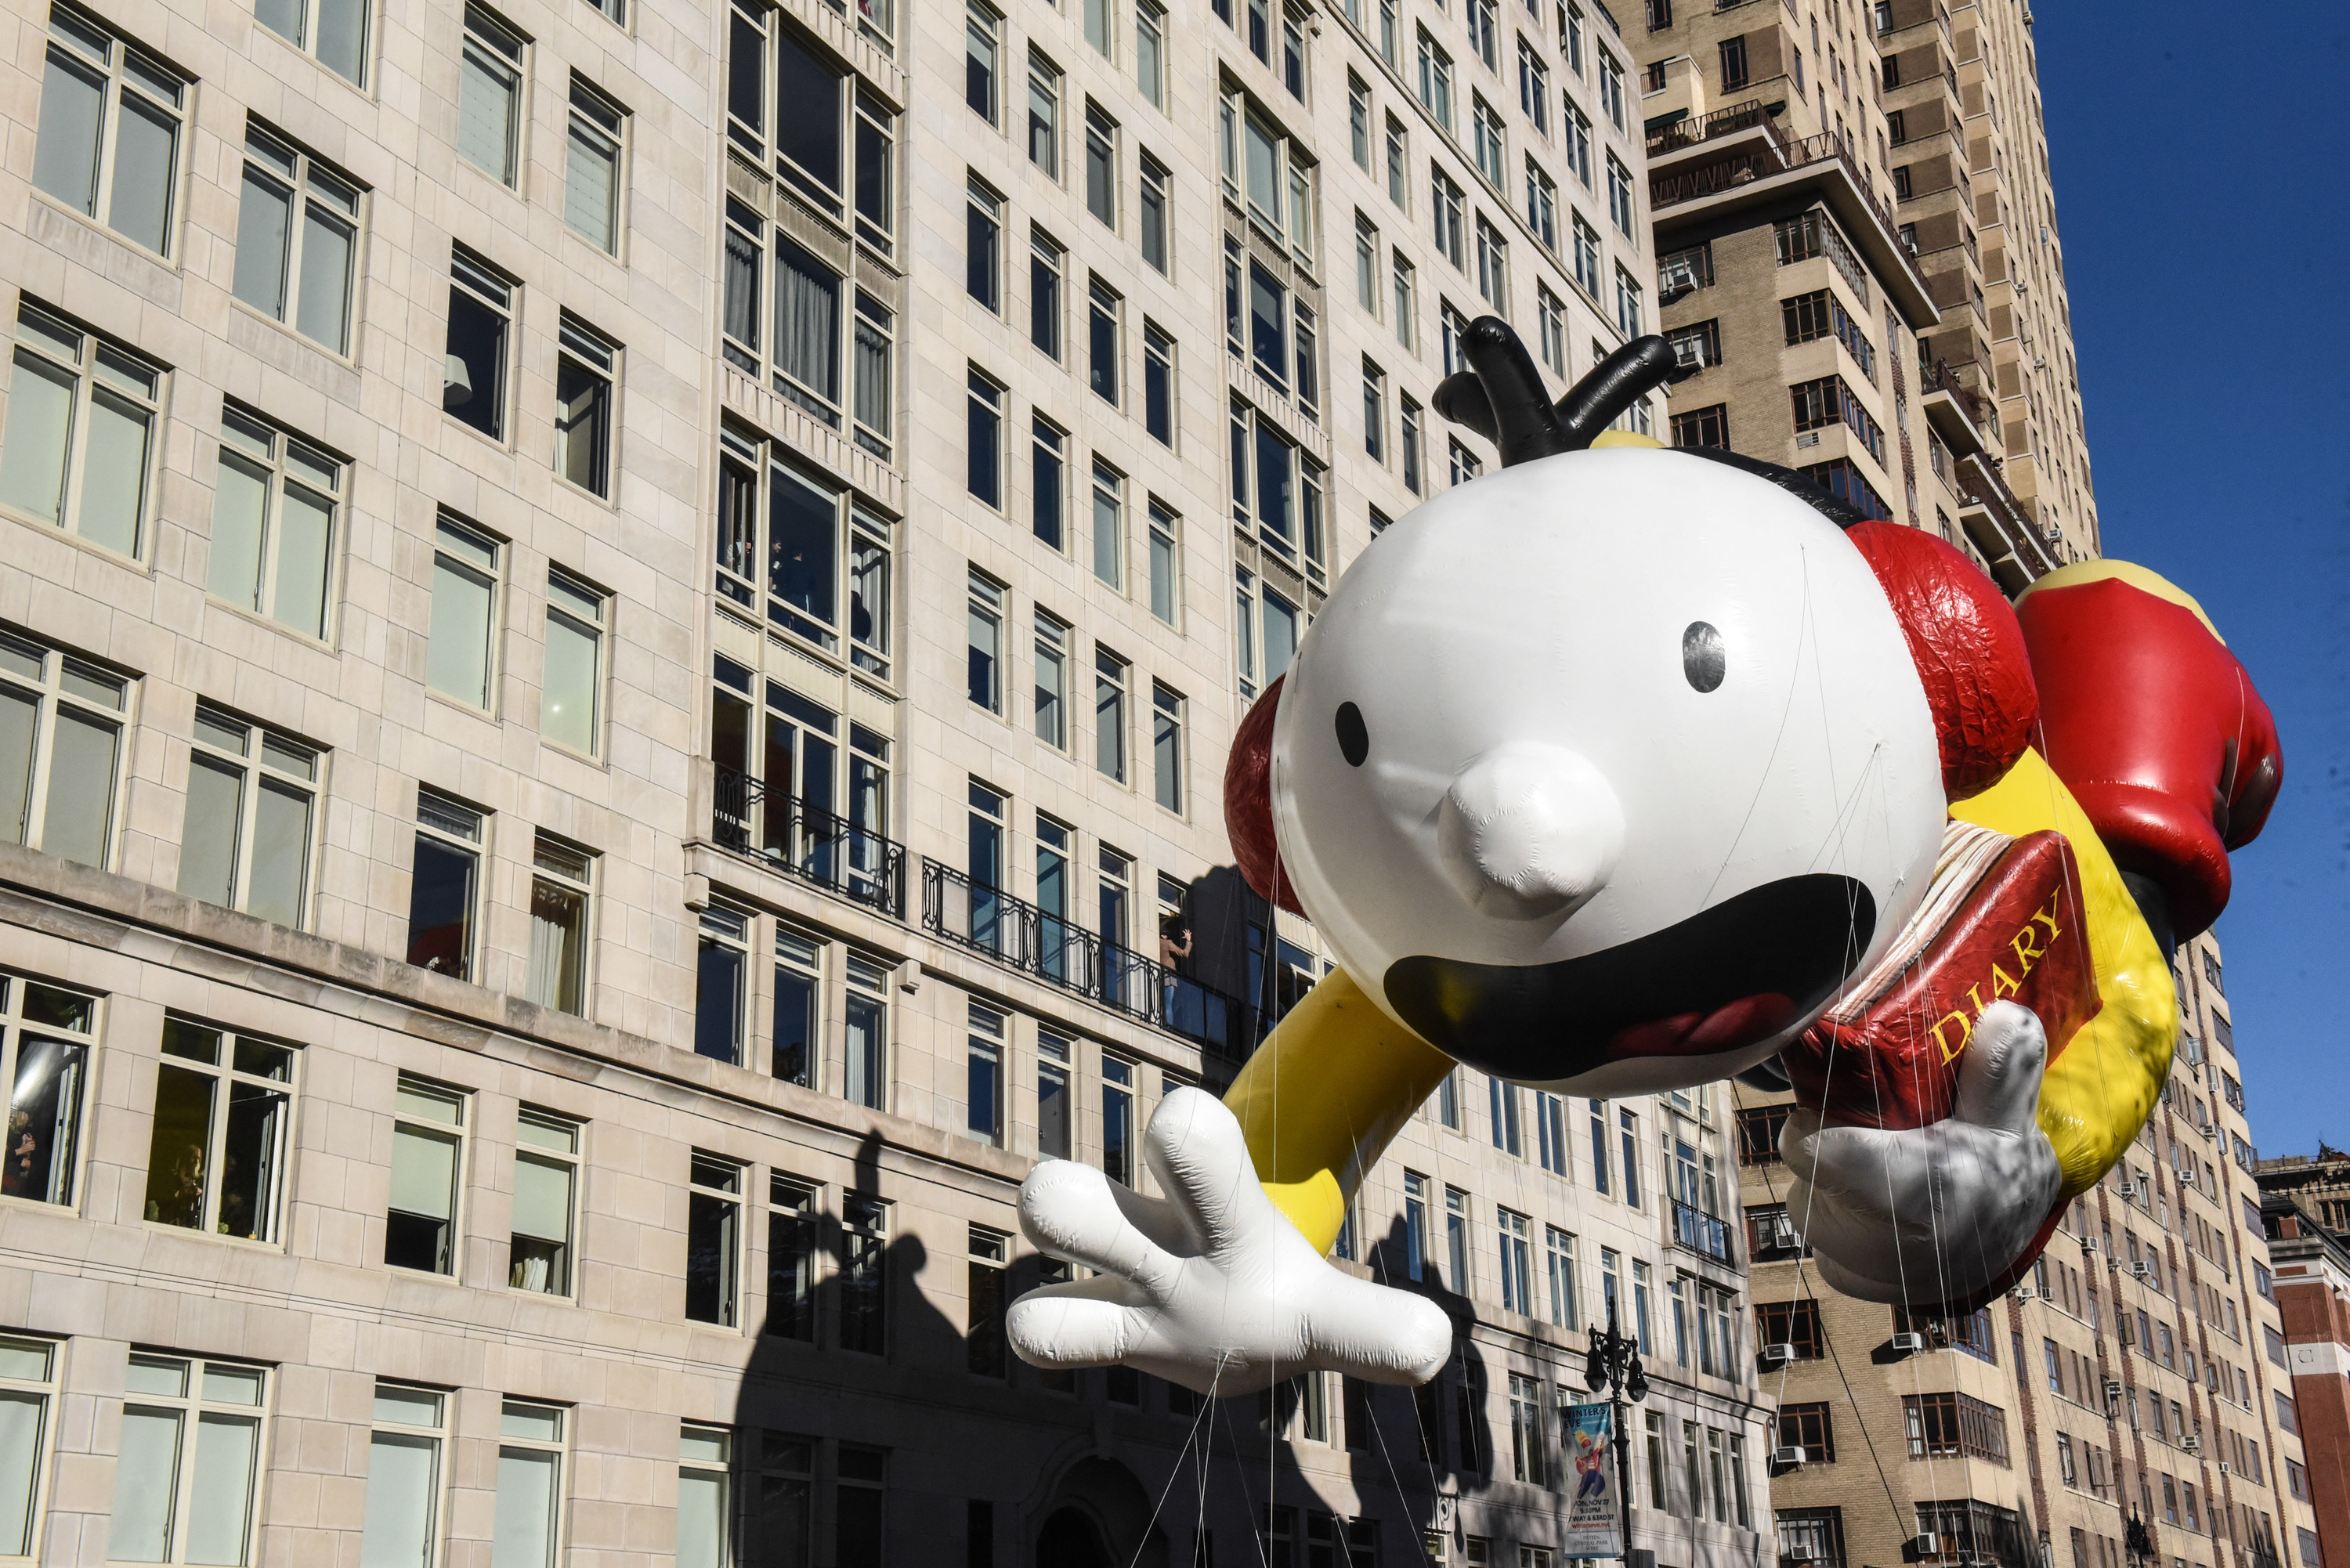 &quot;Diary of a Wimpy Kid&quot; balloon